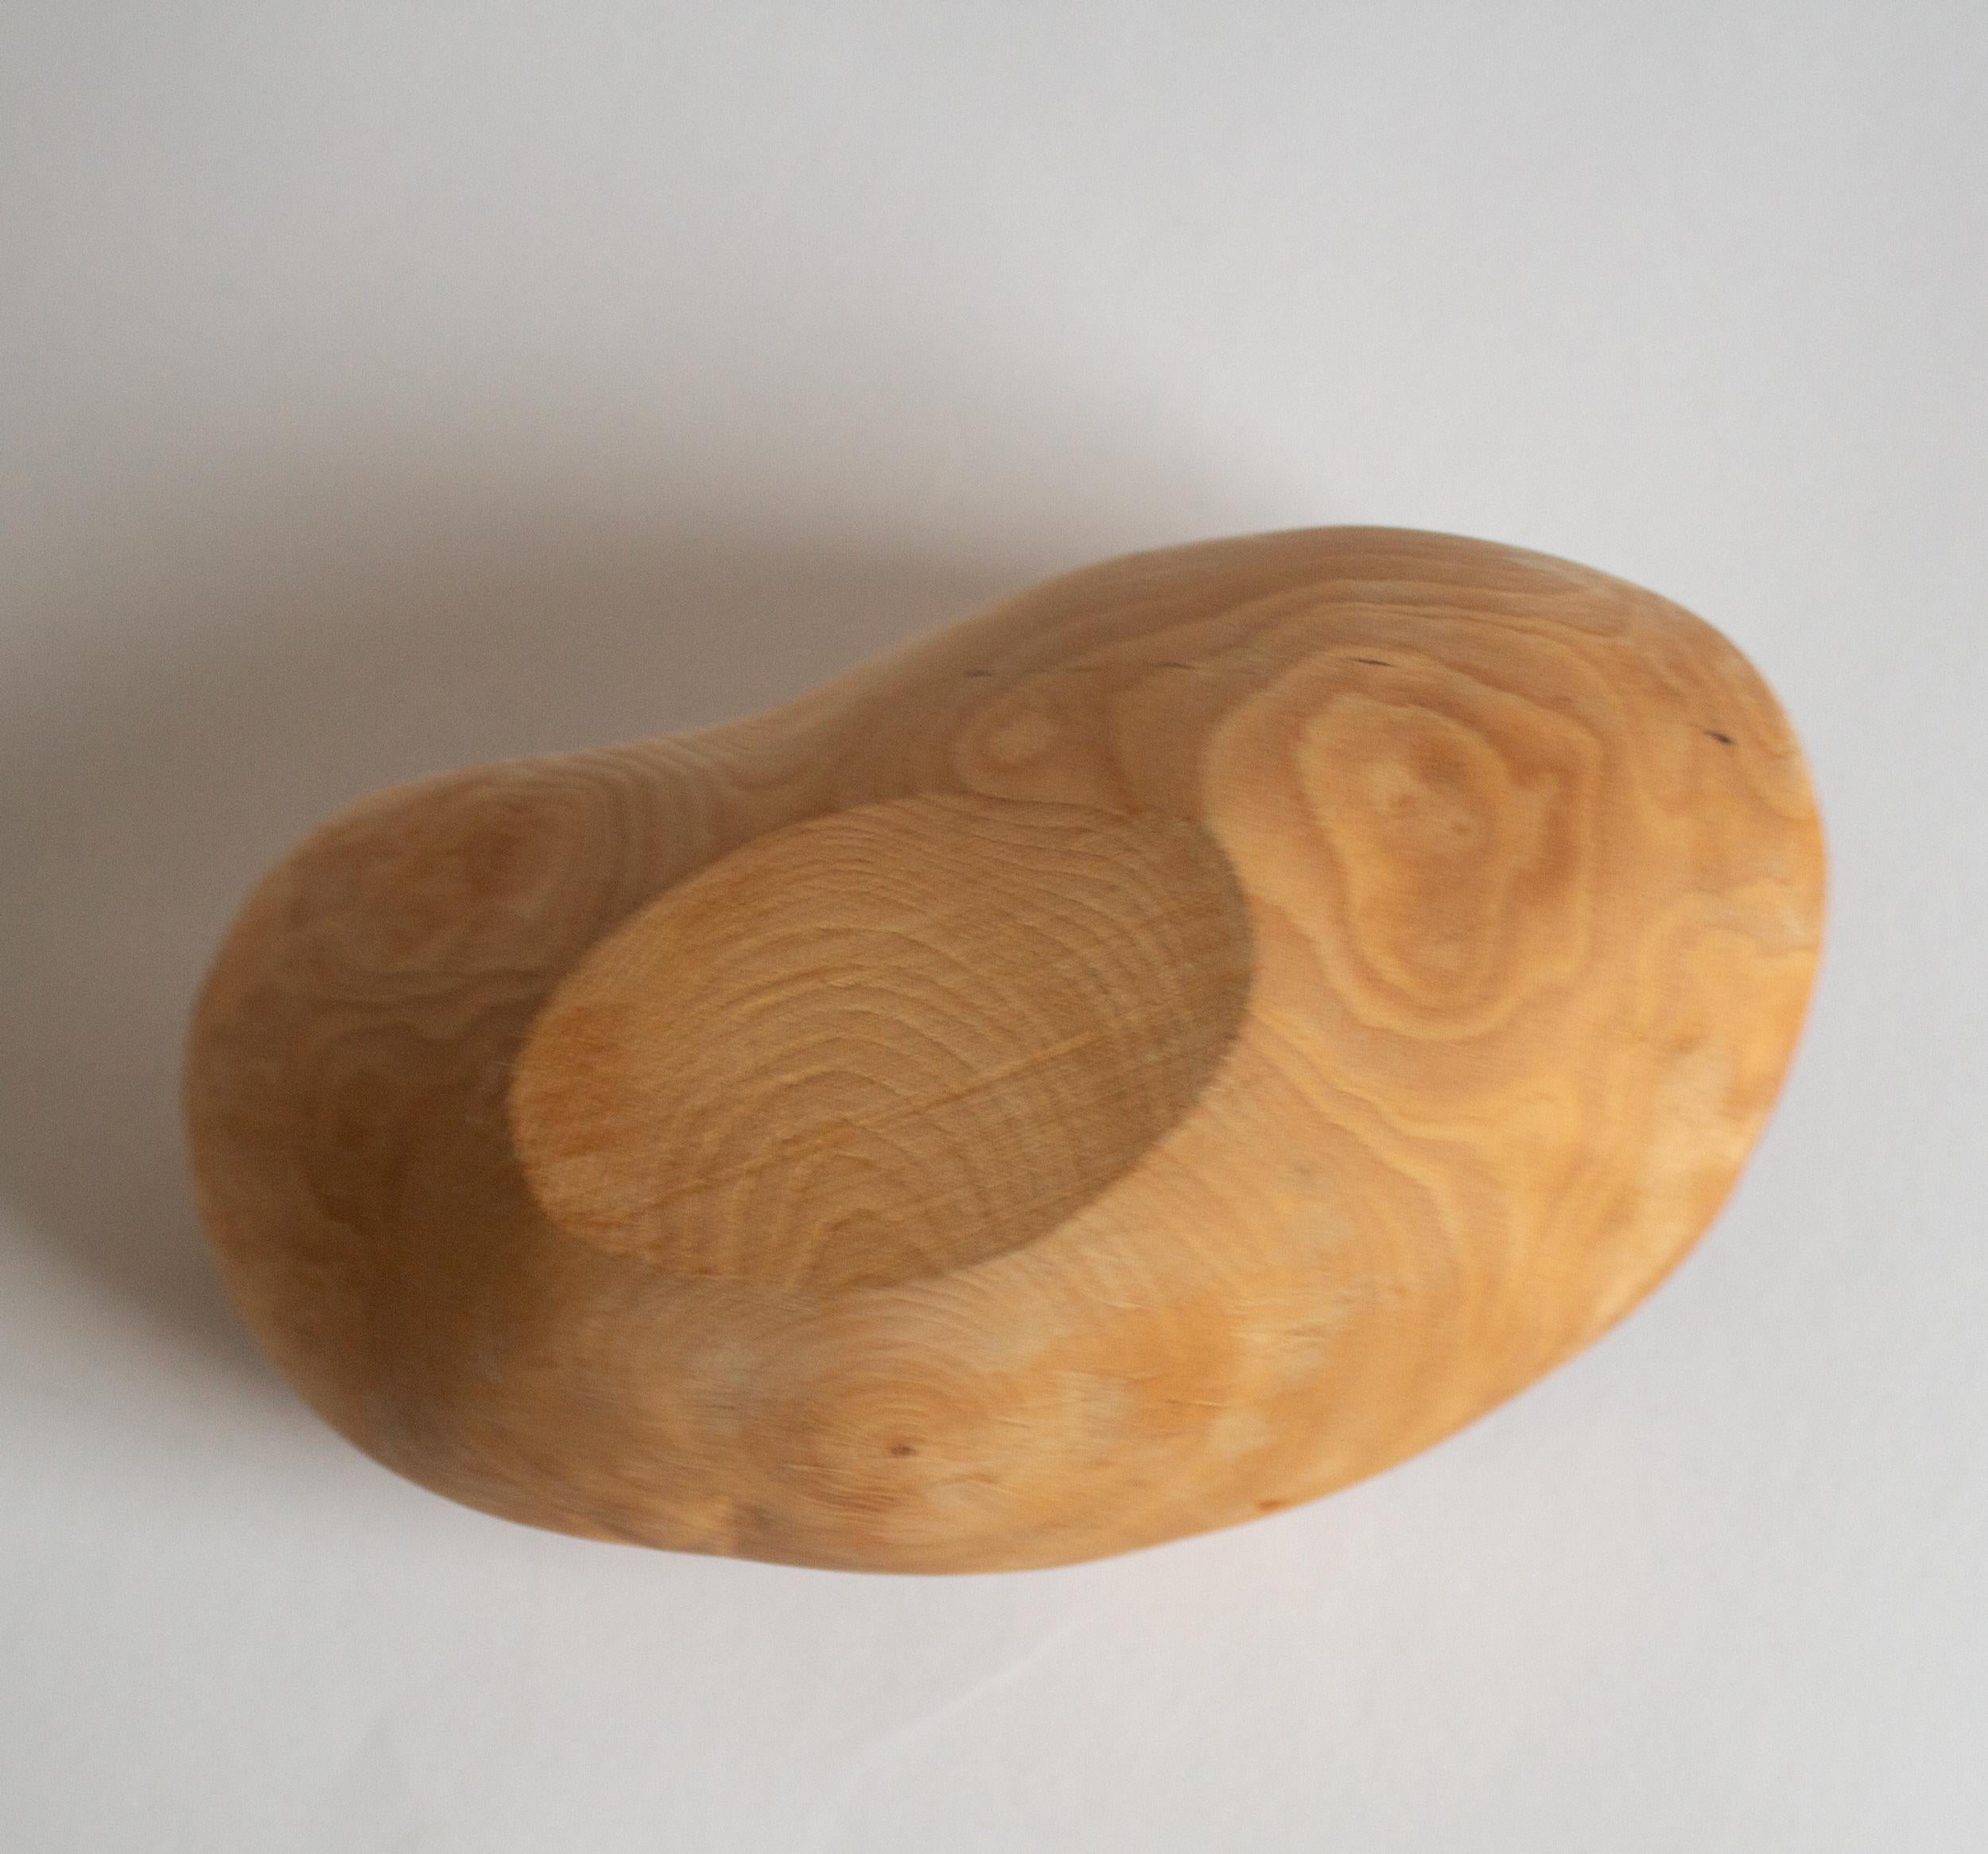 Small Organic Shaped Swedish Handmade Arte Povera Birch Bowl.
(Arte povera was a radical Italian art movement from the late 1960s to 1970s whose artists explored a range of unconventional processes and non traditional ‘everyday’ materials).